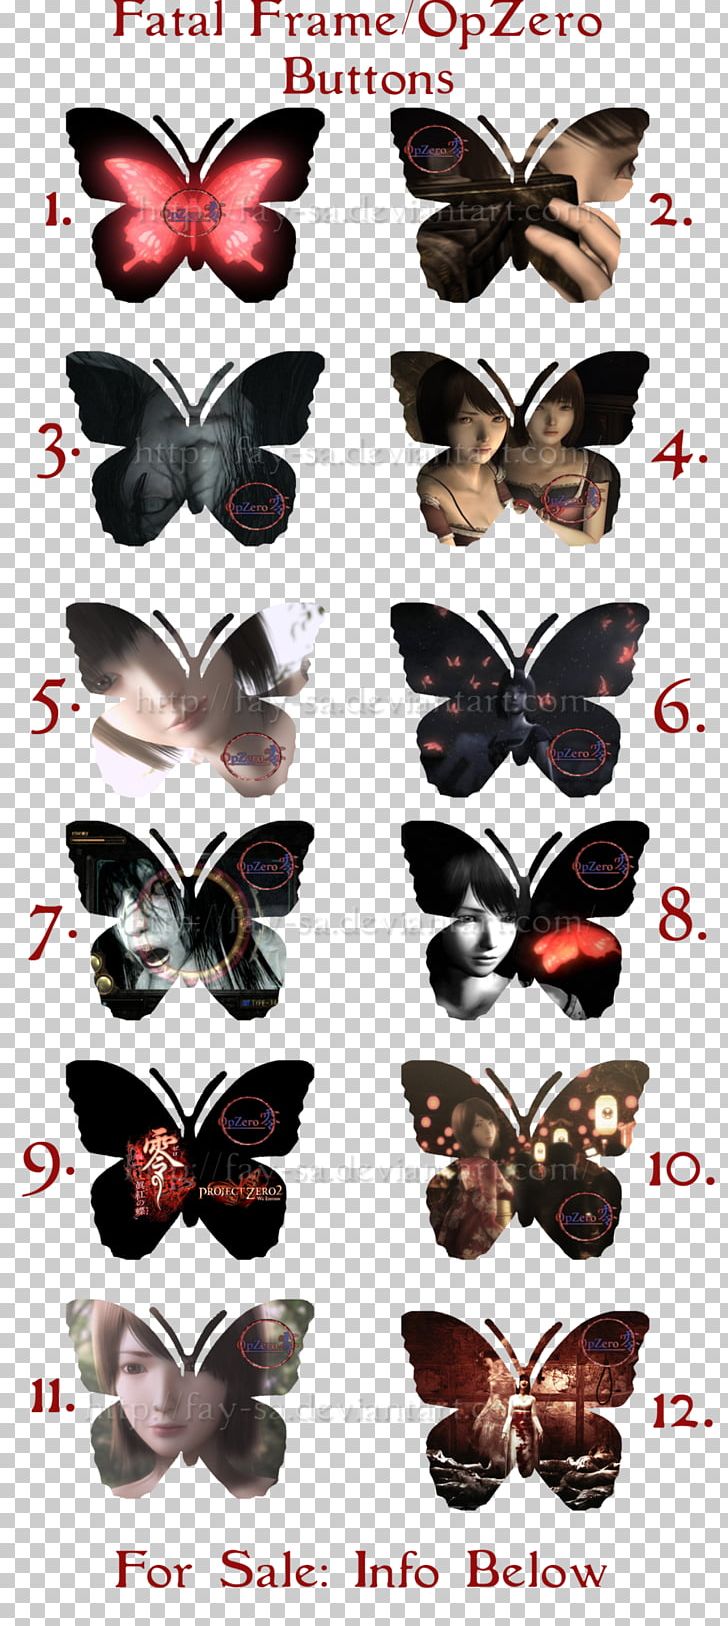 Fatal Frame II: Crimson Butterfly Project Zero 2: Wii Edition Fatal Frame III: The Tormented Video Game PNG, Clipart, Arthropod, Butterfly, Fatal Frame, Fatal Frame Ii Crimson Butterfly, Film Frame Free PNG Download